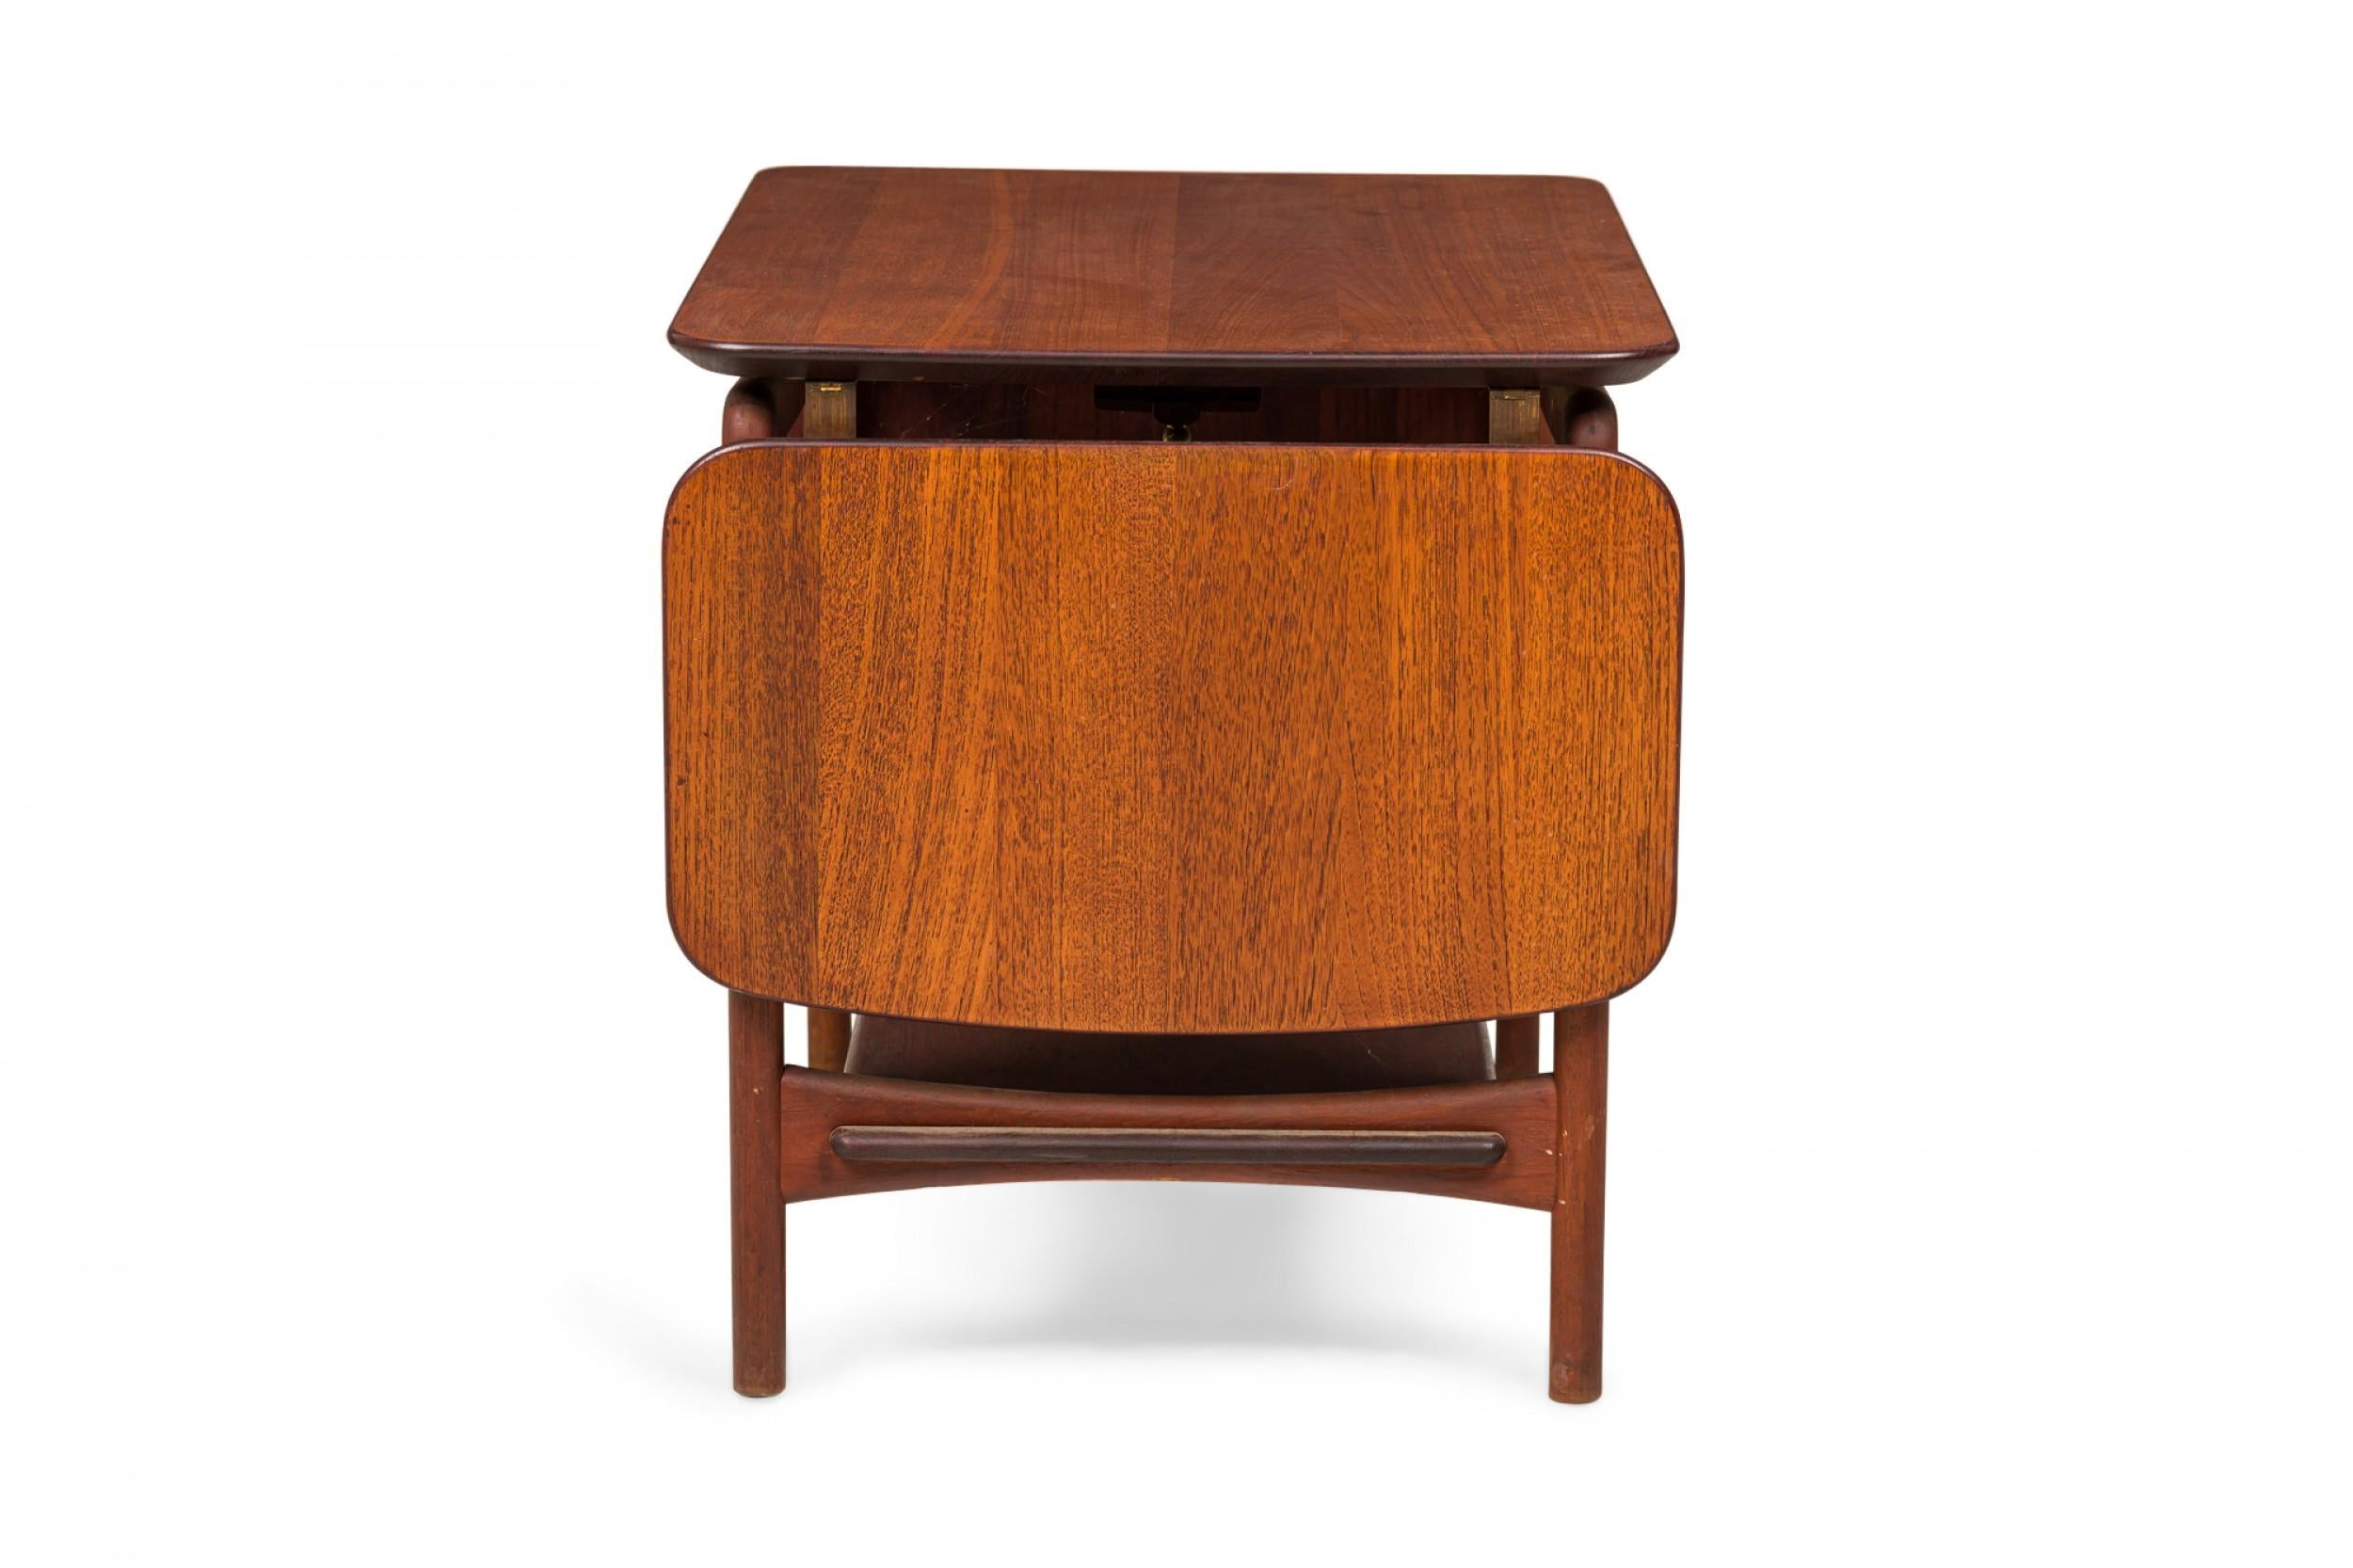 PAIR of Danish Mid-Century rectangular teak end/side tables with two drop leaves, supported by a four legged frame with a bottom stretcher shelf. (PETER HVIDT)(Similar tables: DUF0381, DUF0383)
